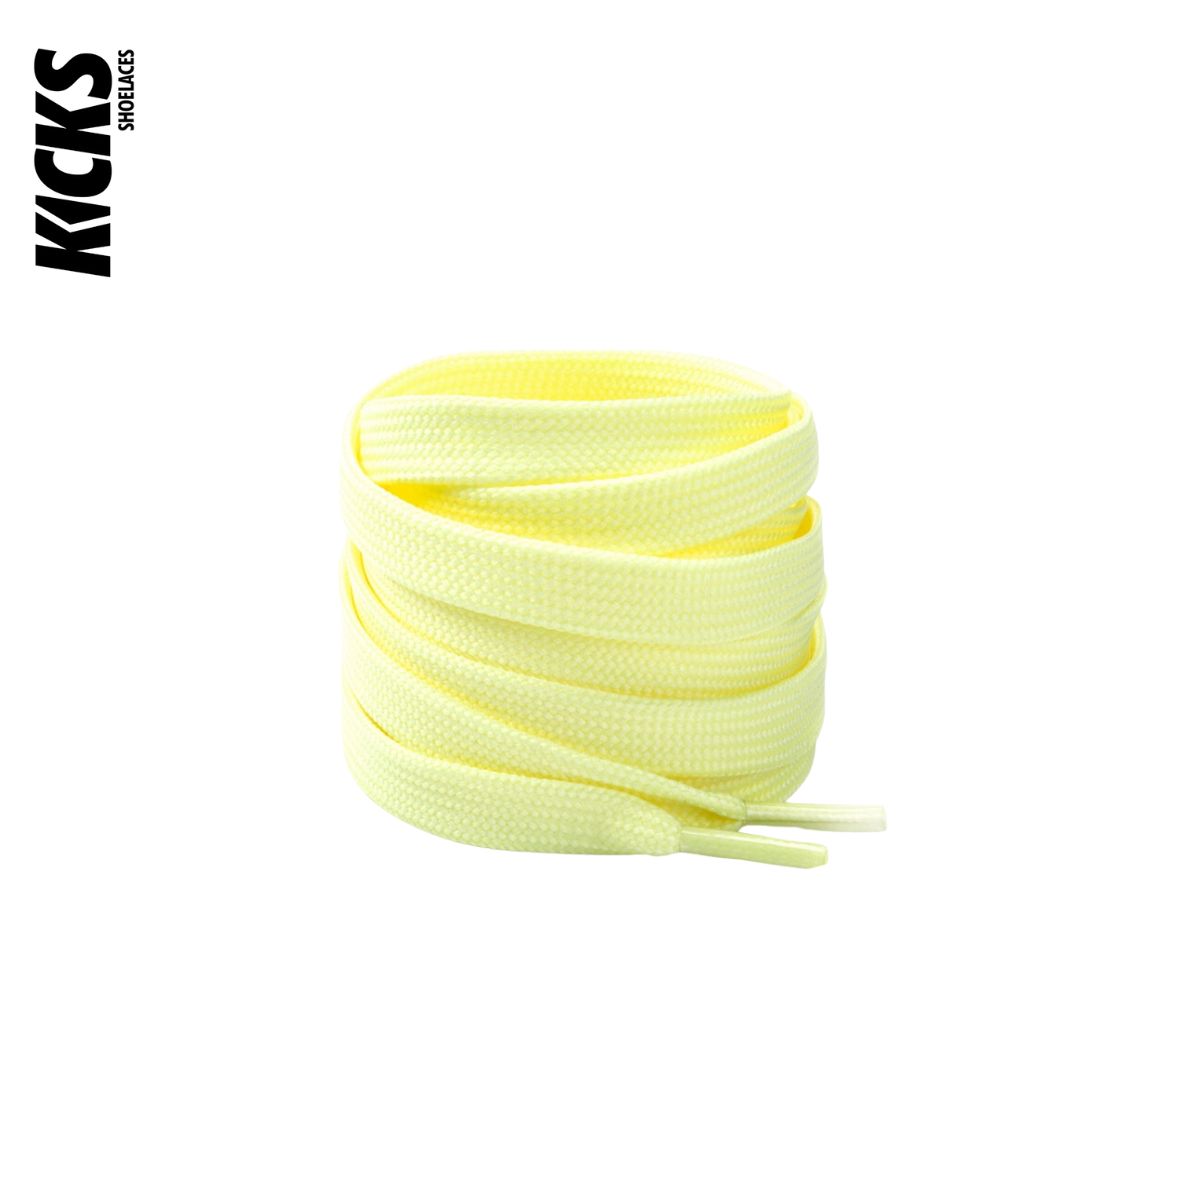 Light Yellow Nike Dunks Shoelace Replacements